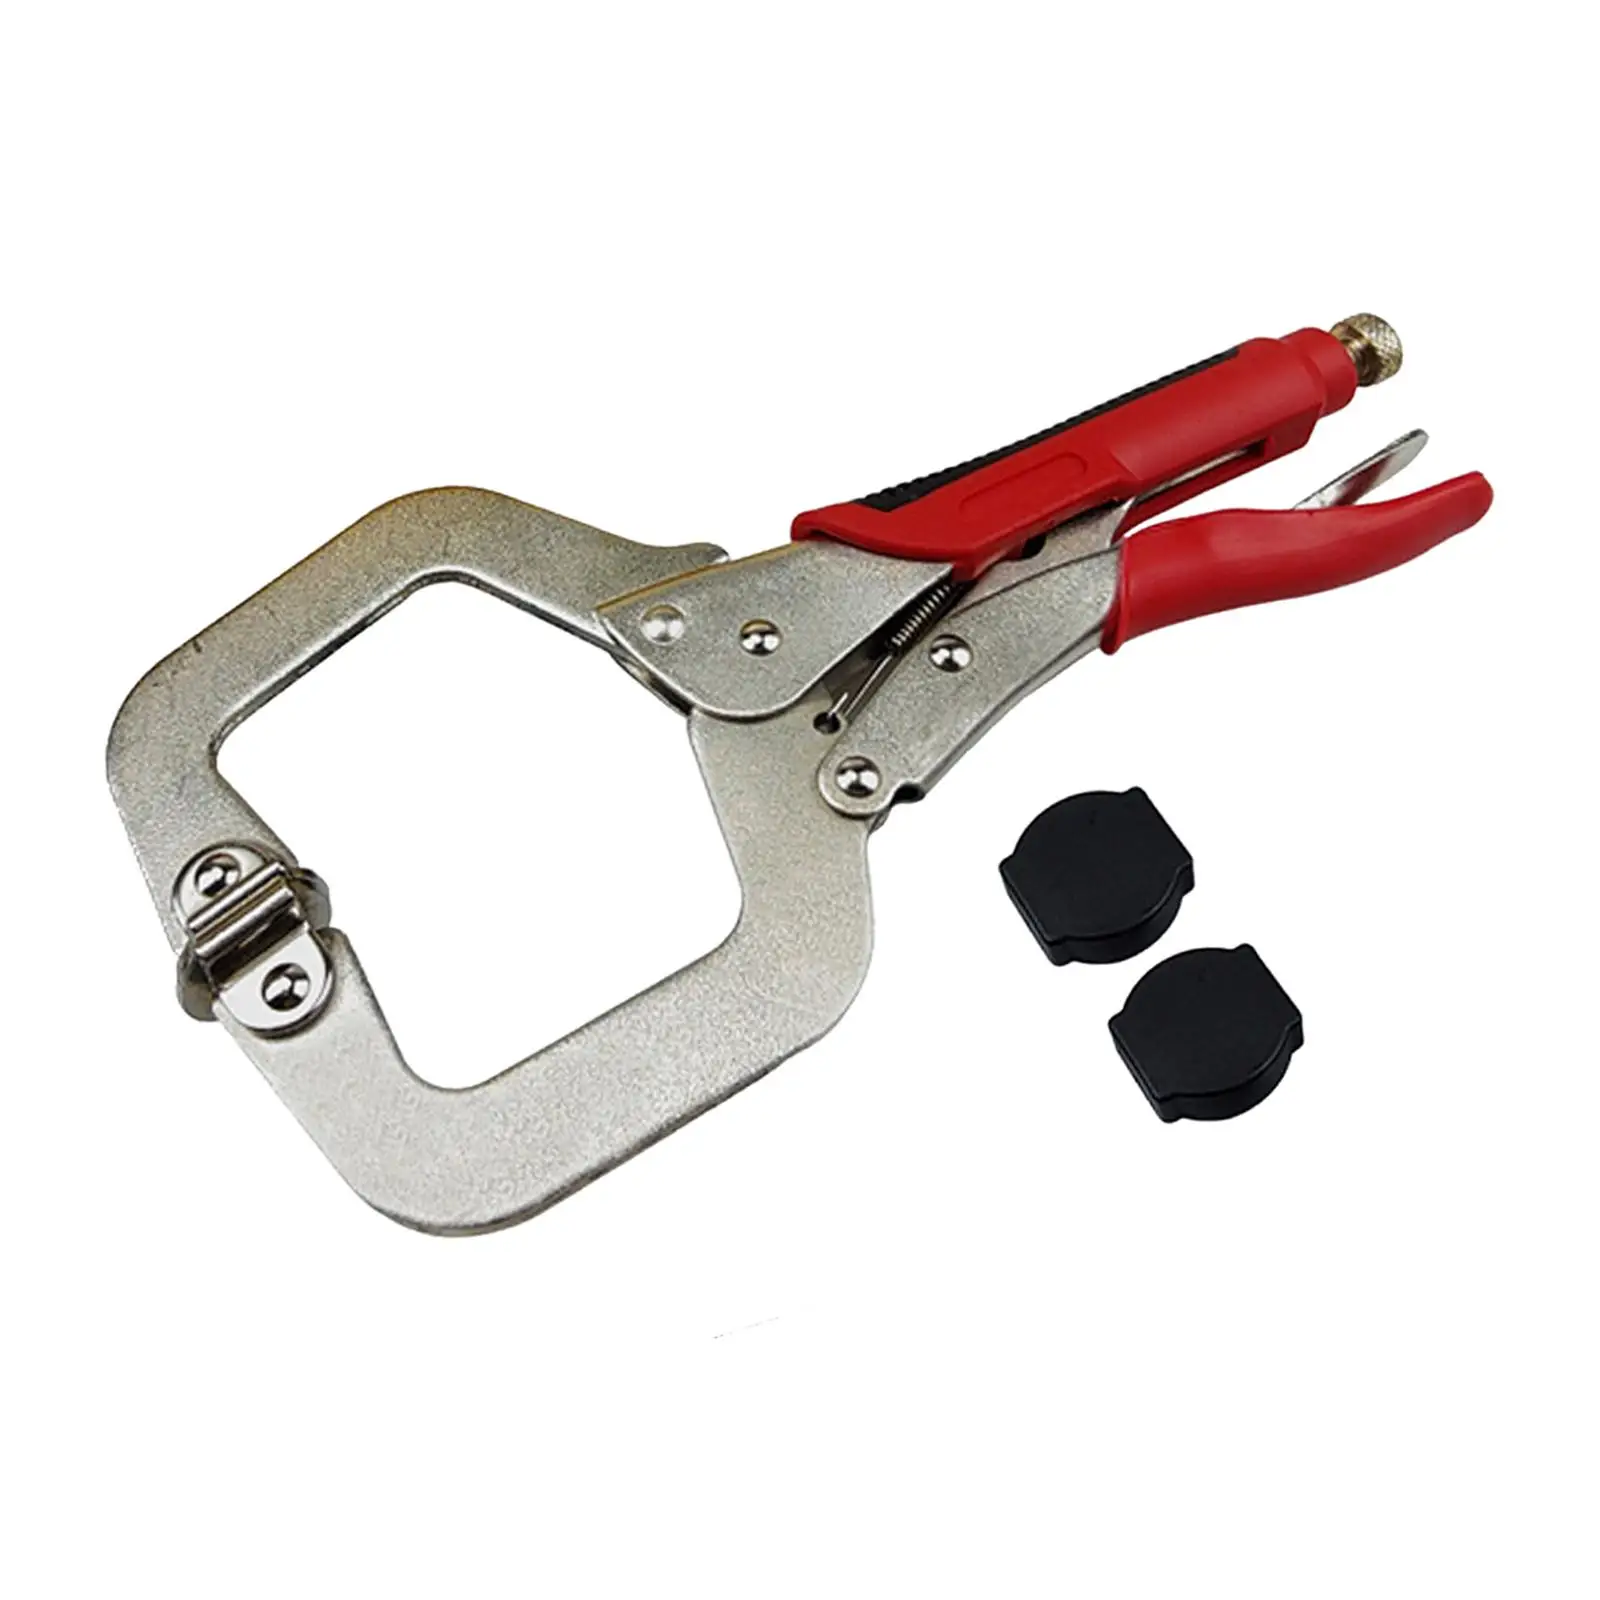 c style clamp Welding vise grips Pliers Locking Pliers for Hardware Mounting Tools Aligning